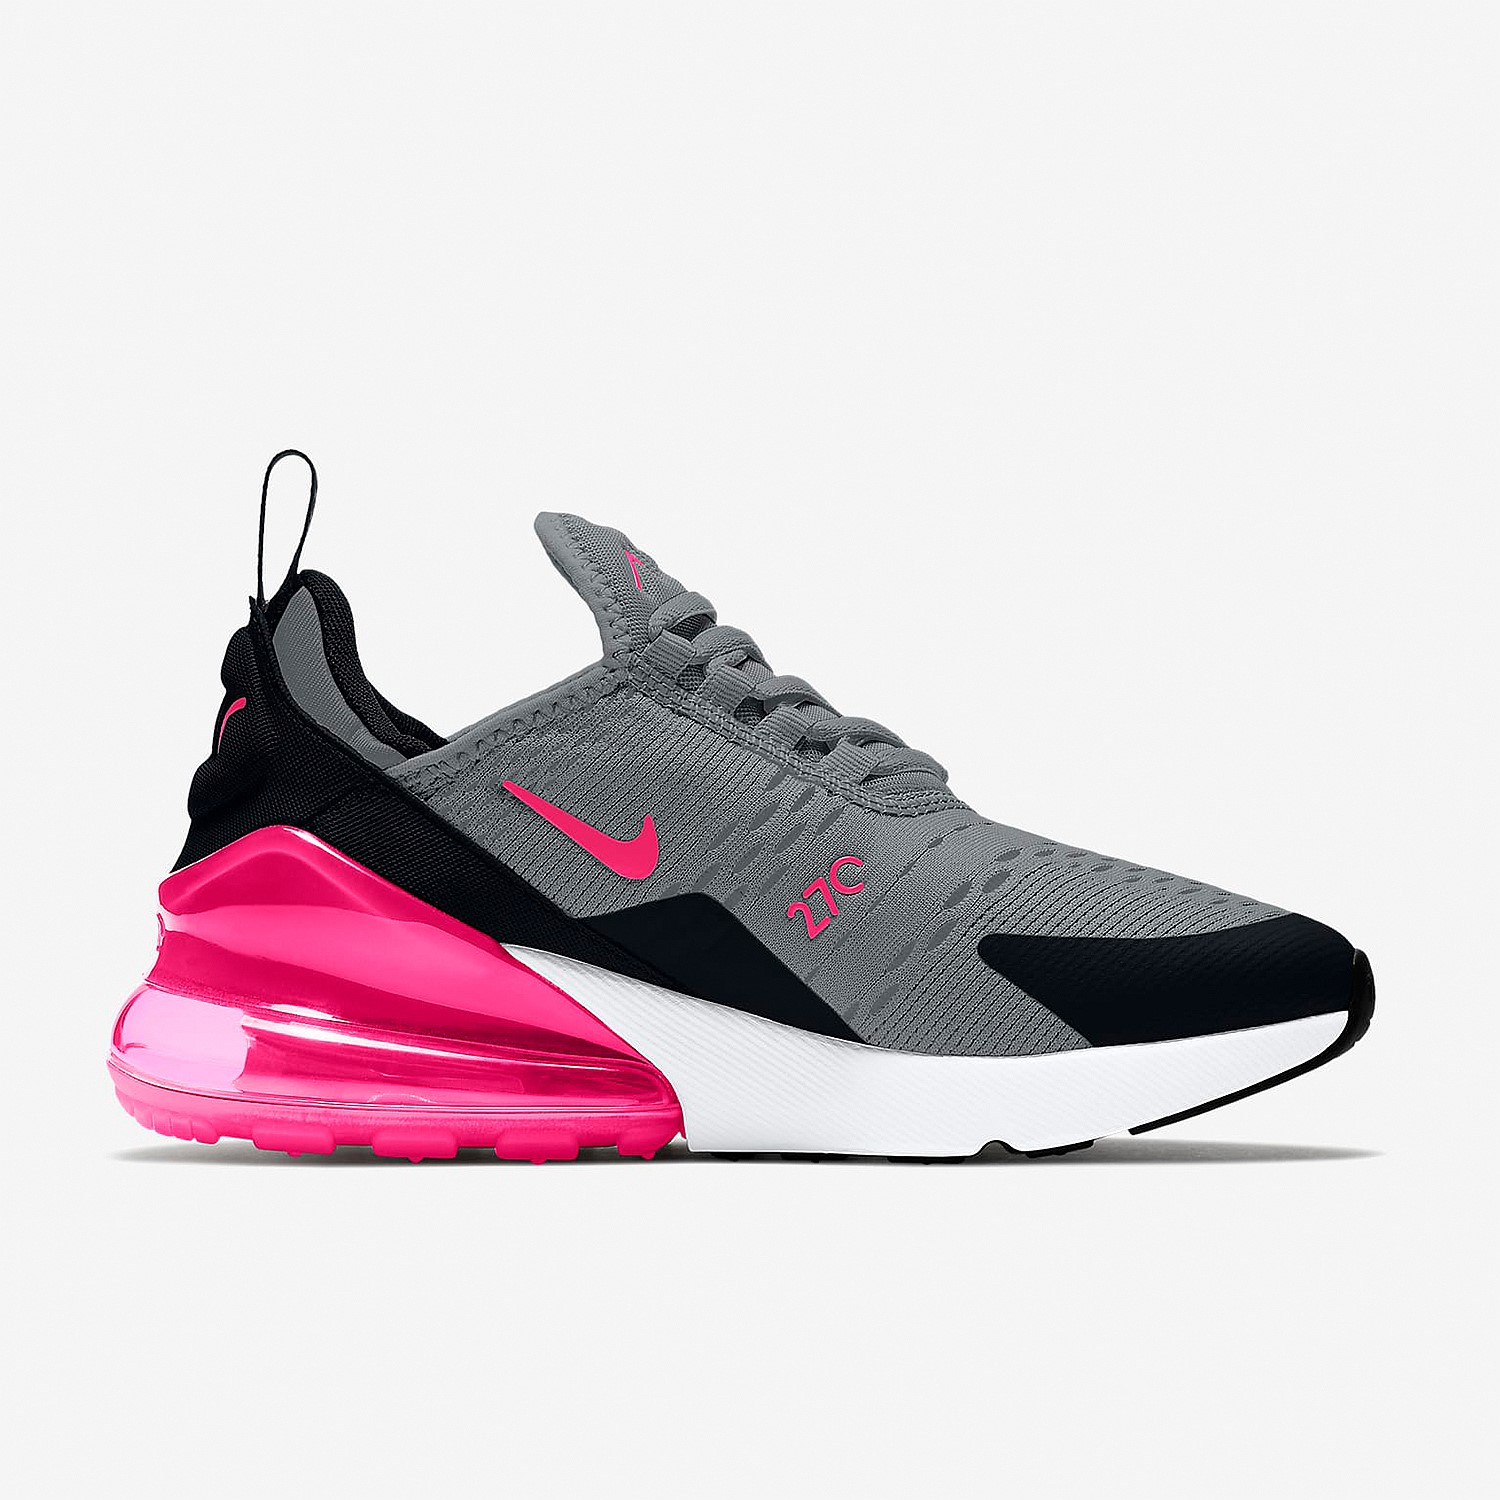 Nike Air Max | Sneakers Online | Stirling Sports - Air Max 270 Youth